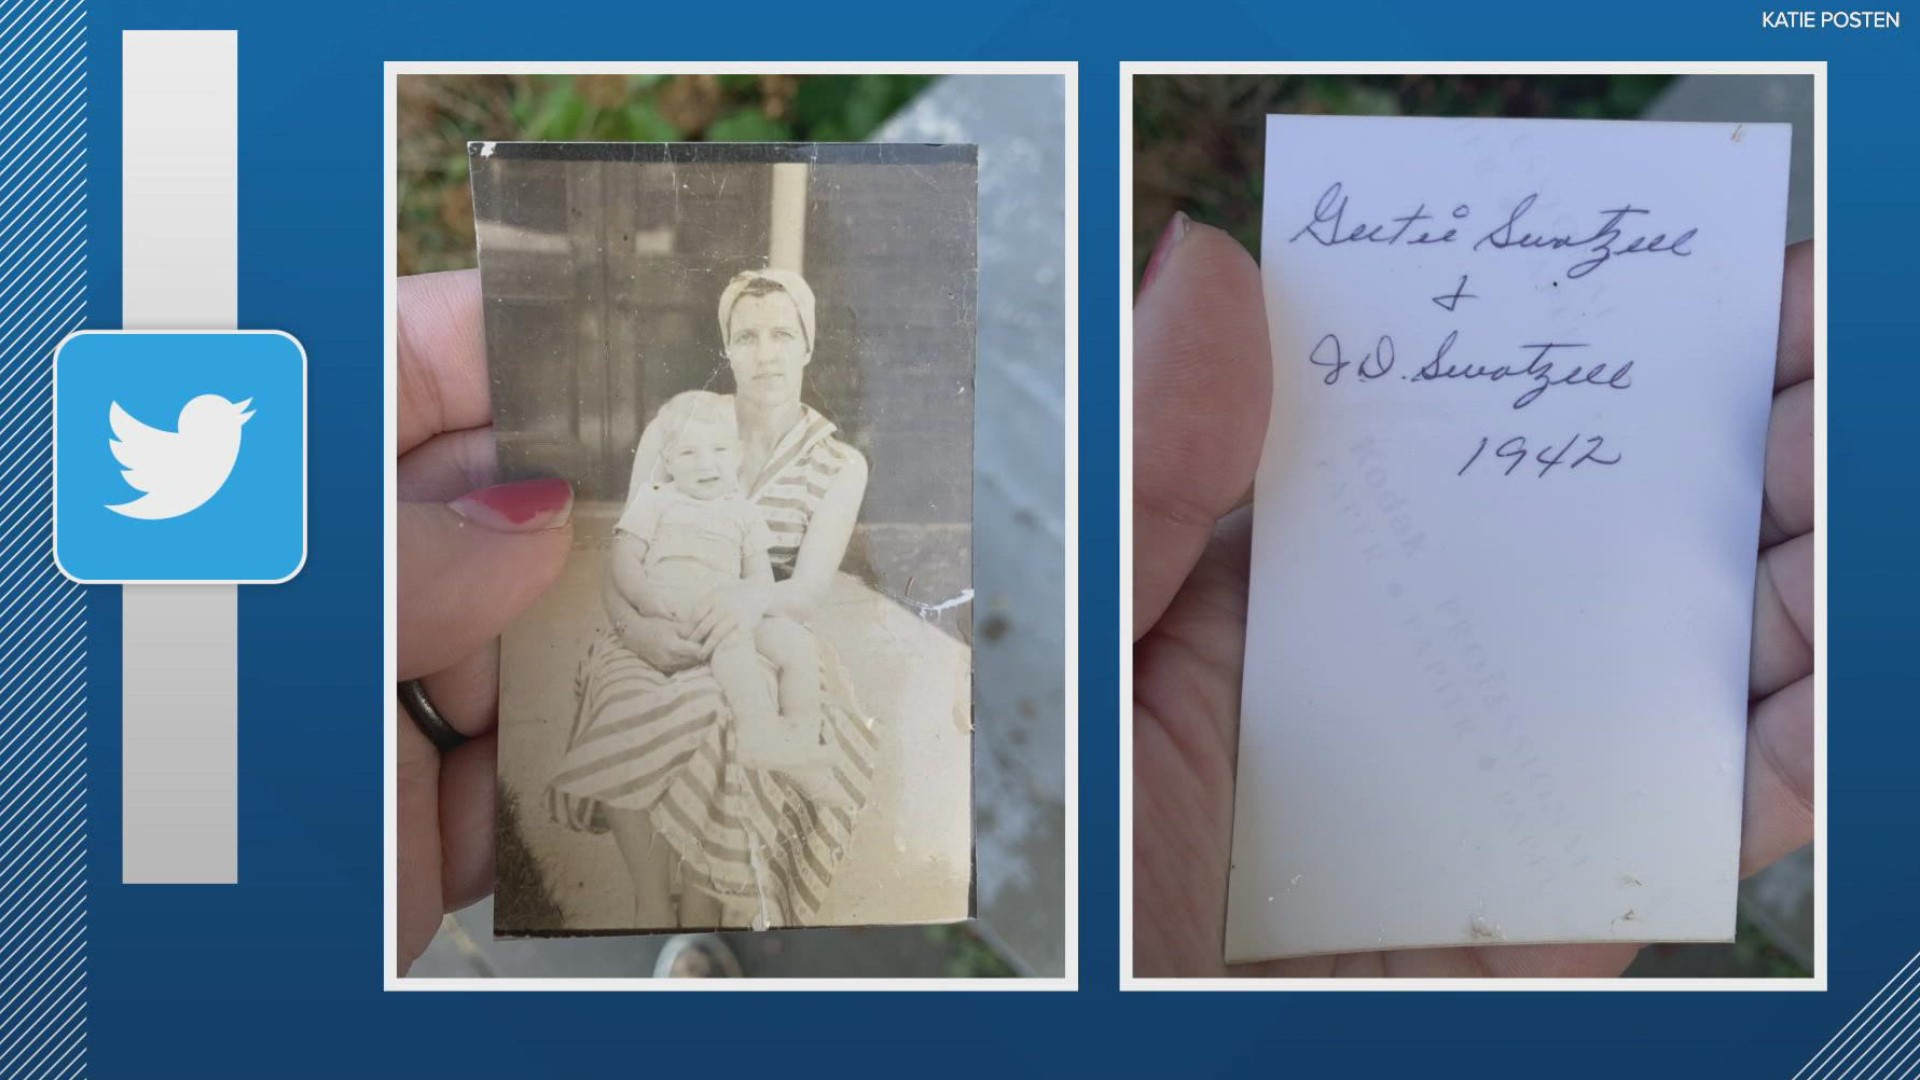 A New Albany woman found a picture stuck to her car window that was from Kentucky. She used social media to find the owners and plans to return it to them this week.